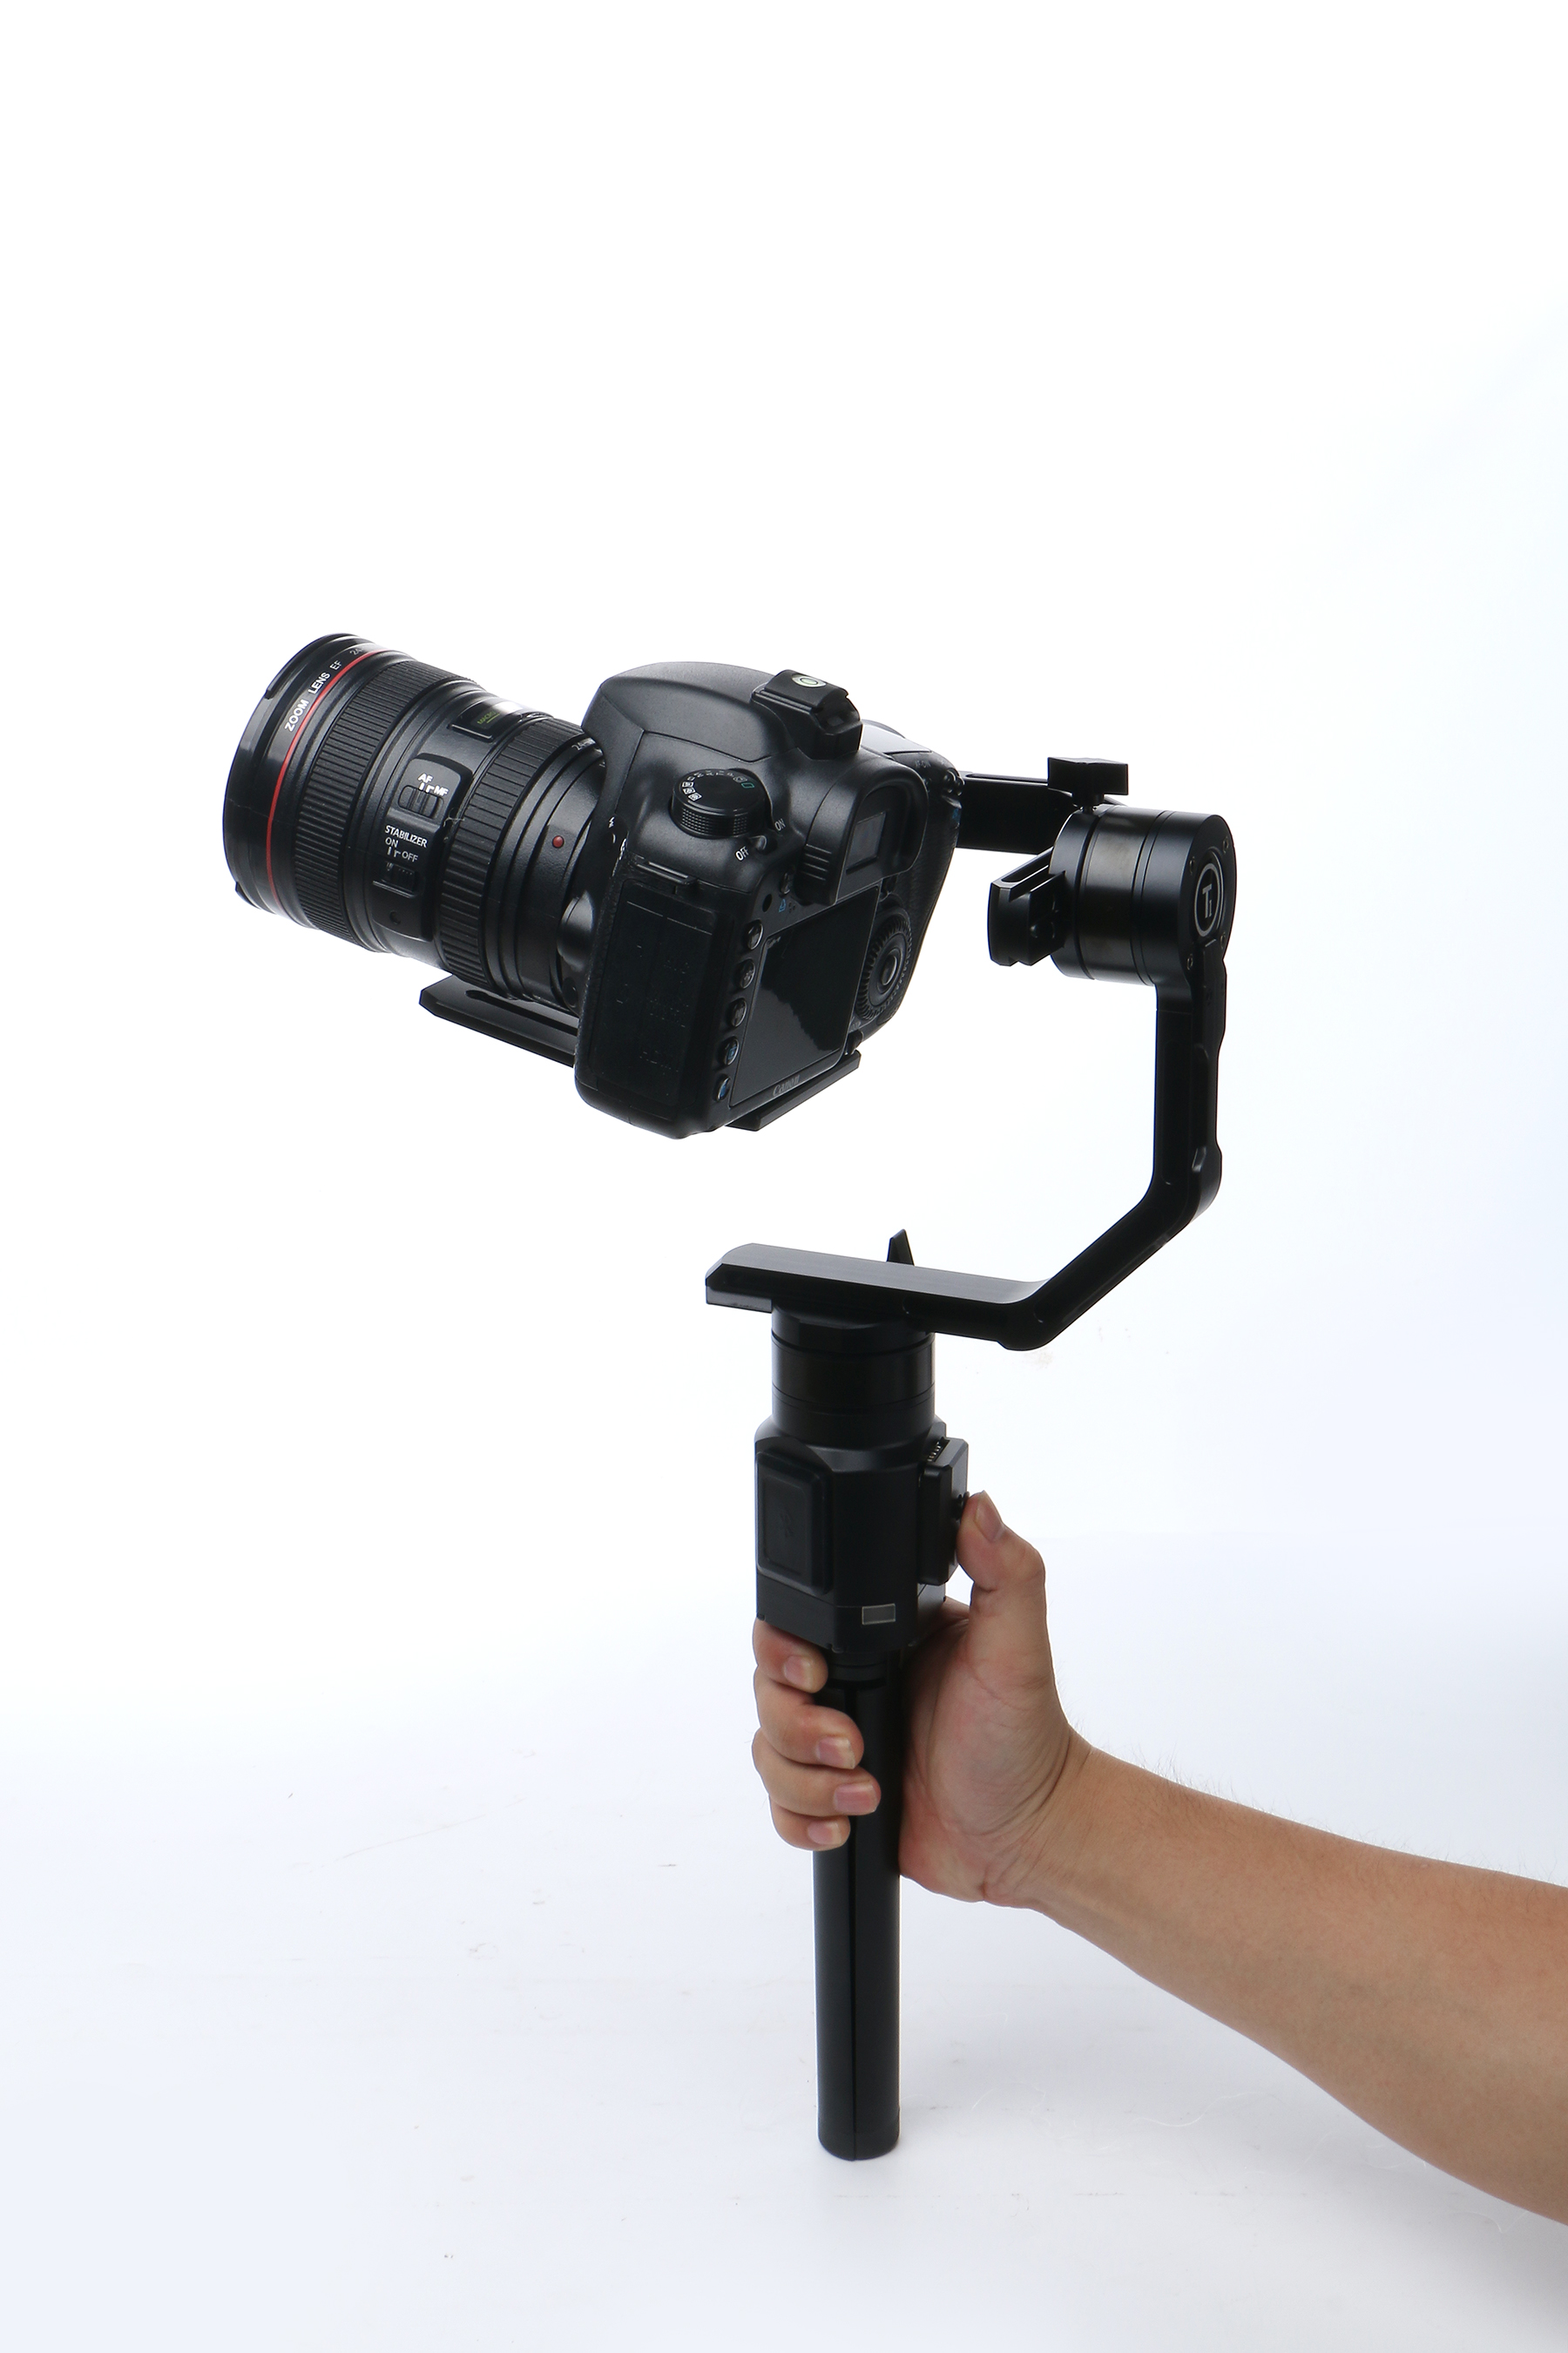 T13-Axis Gimbal Handheld Stabilizer for small DSLR Cameras basecam electronics